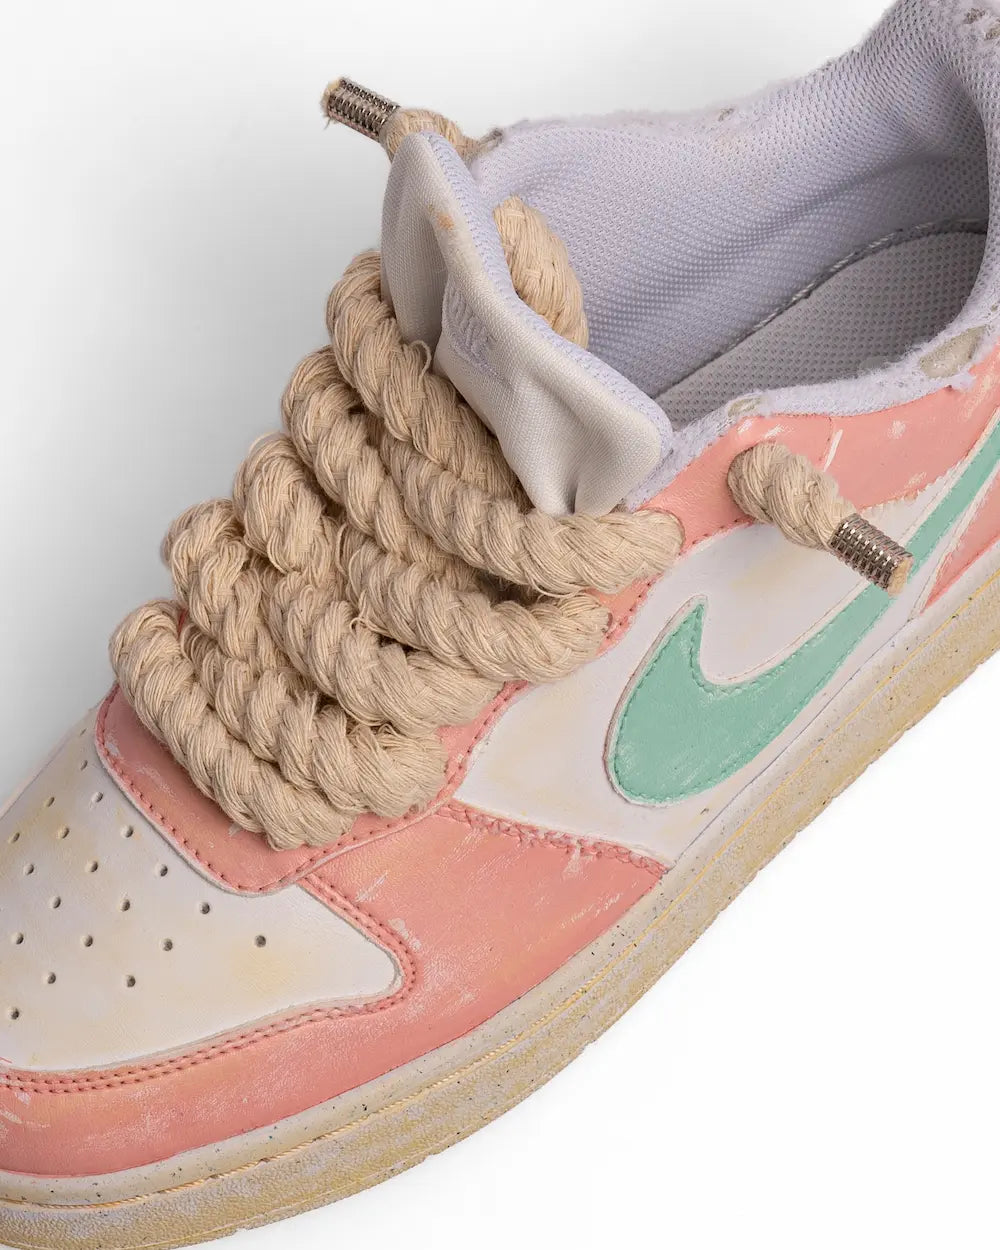 Nike borough donna Rope Vintage Pink/Mint con lacci in corda beige